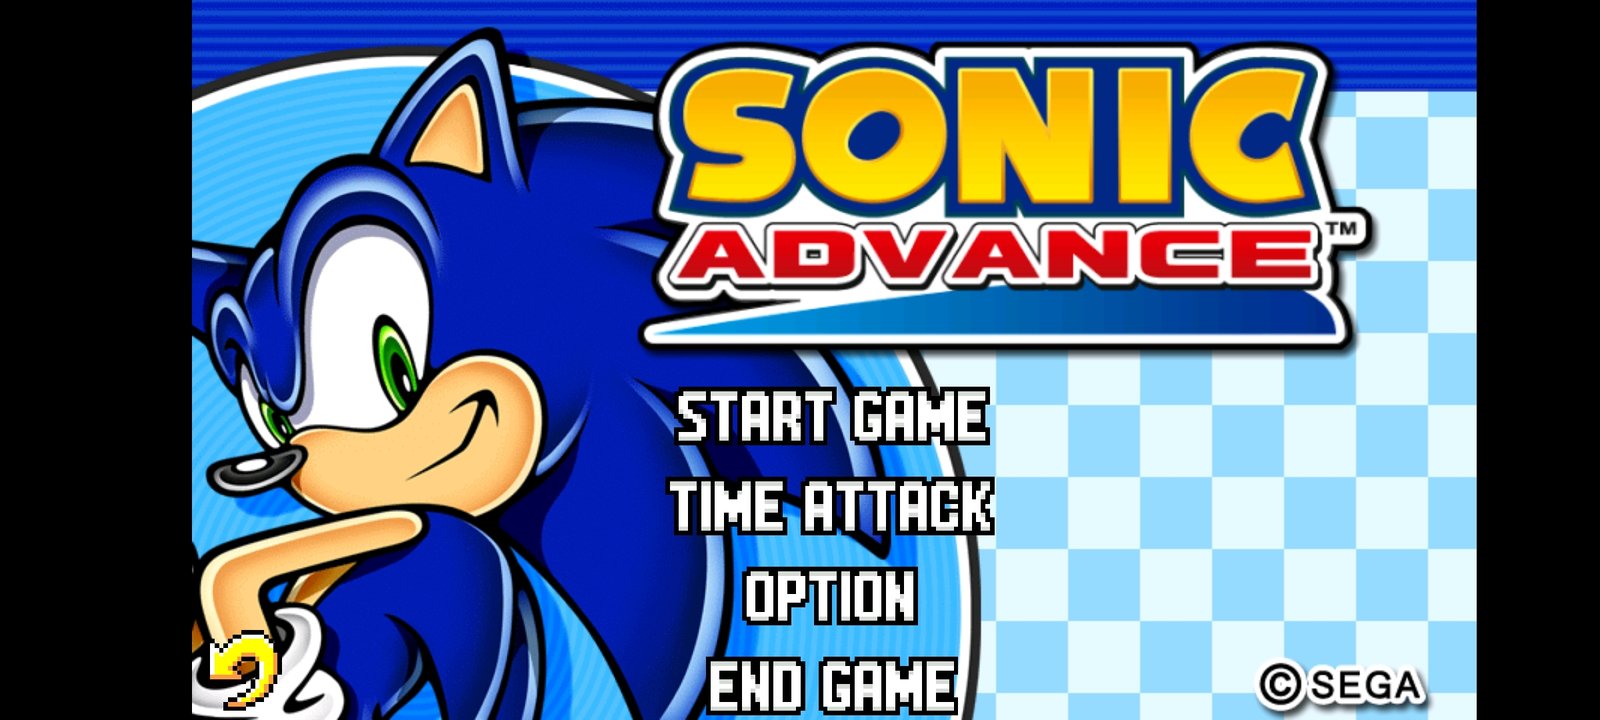 Sonic The Hedgehog 2 APK + Mod 1.8.2 - Download Free for Android